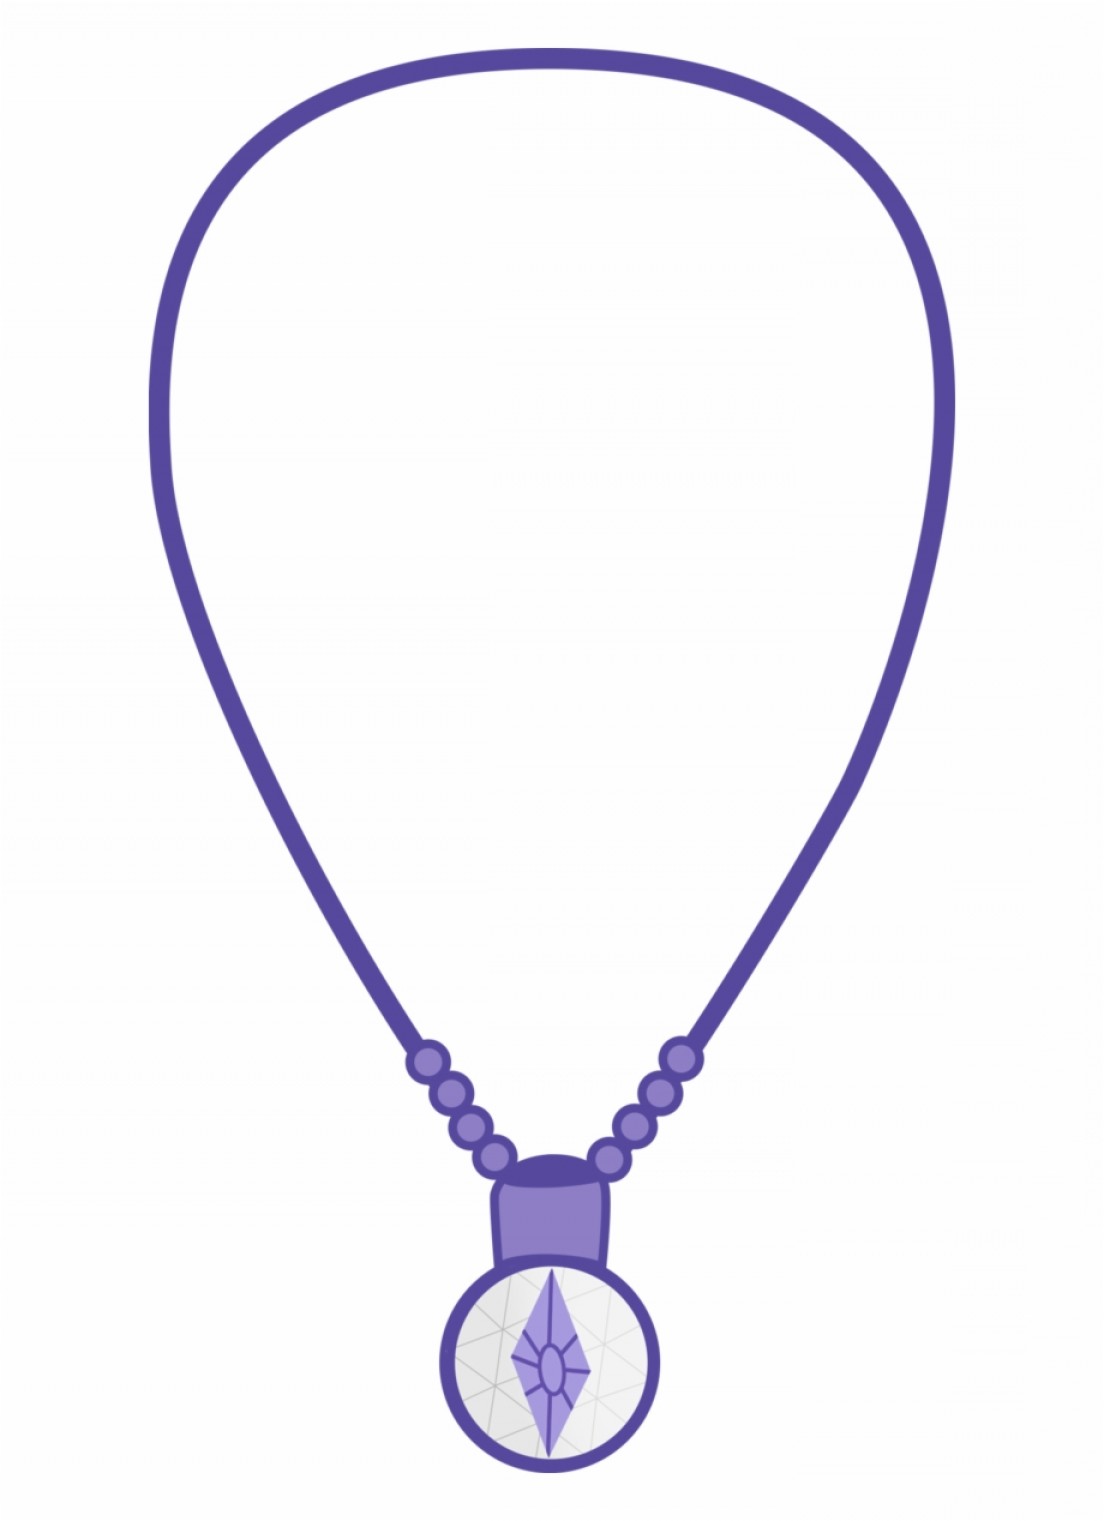 necklace clipart vector